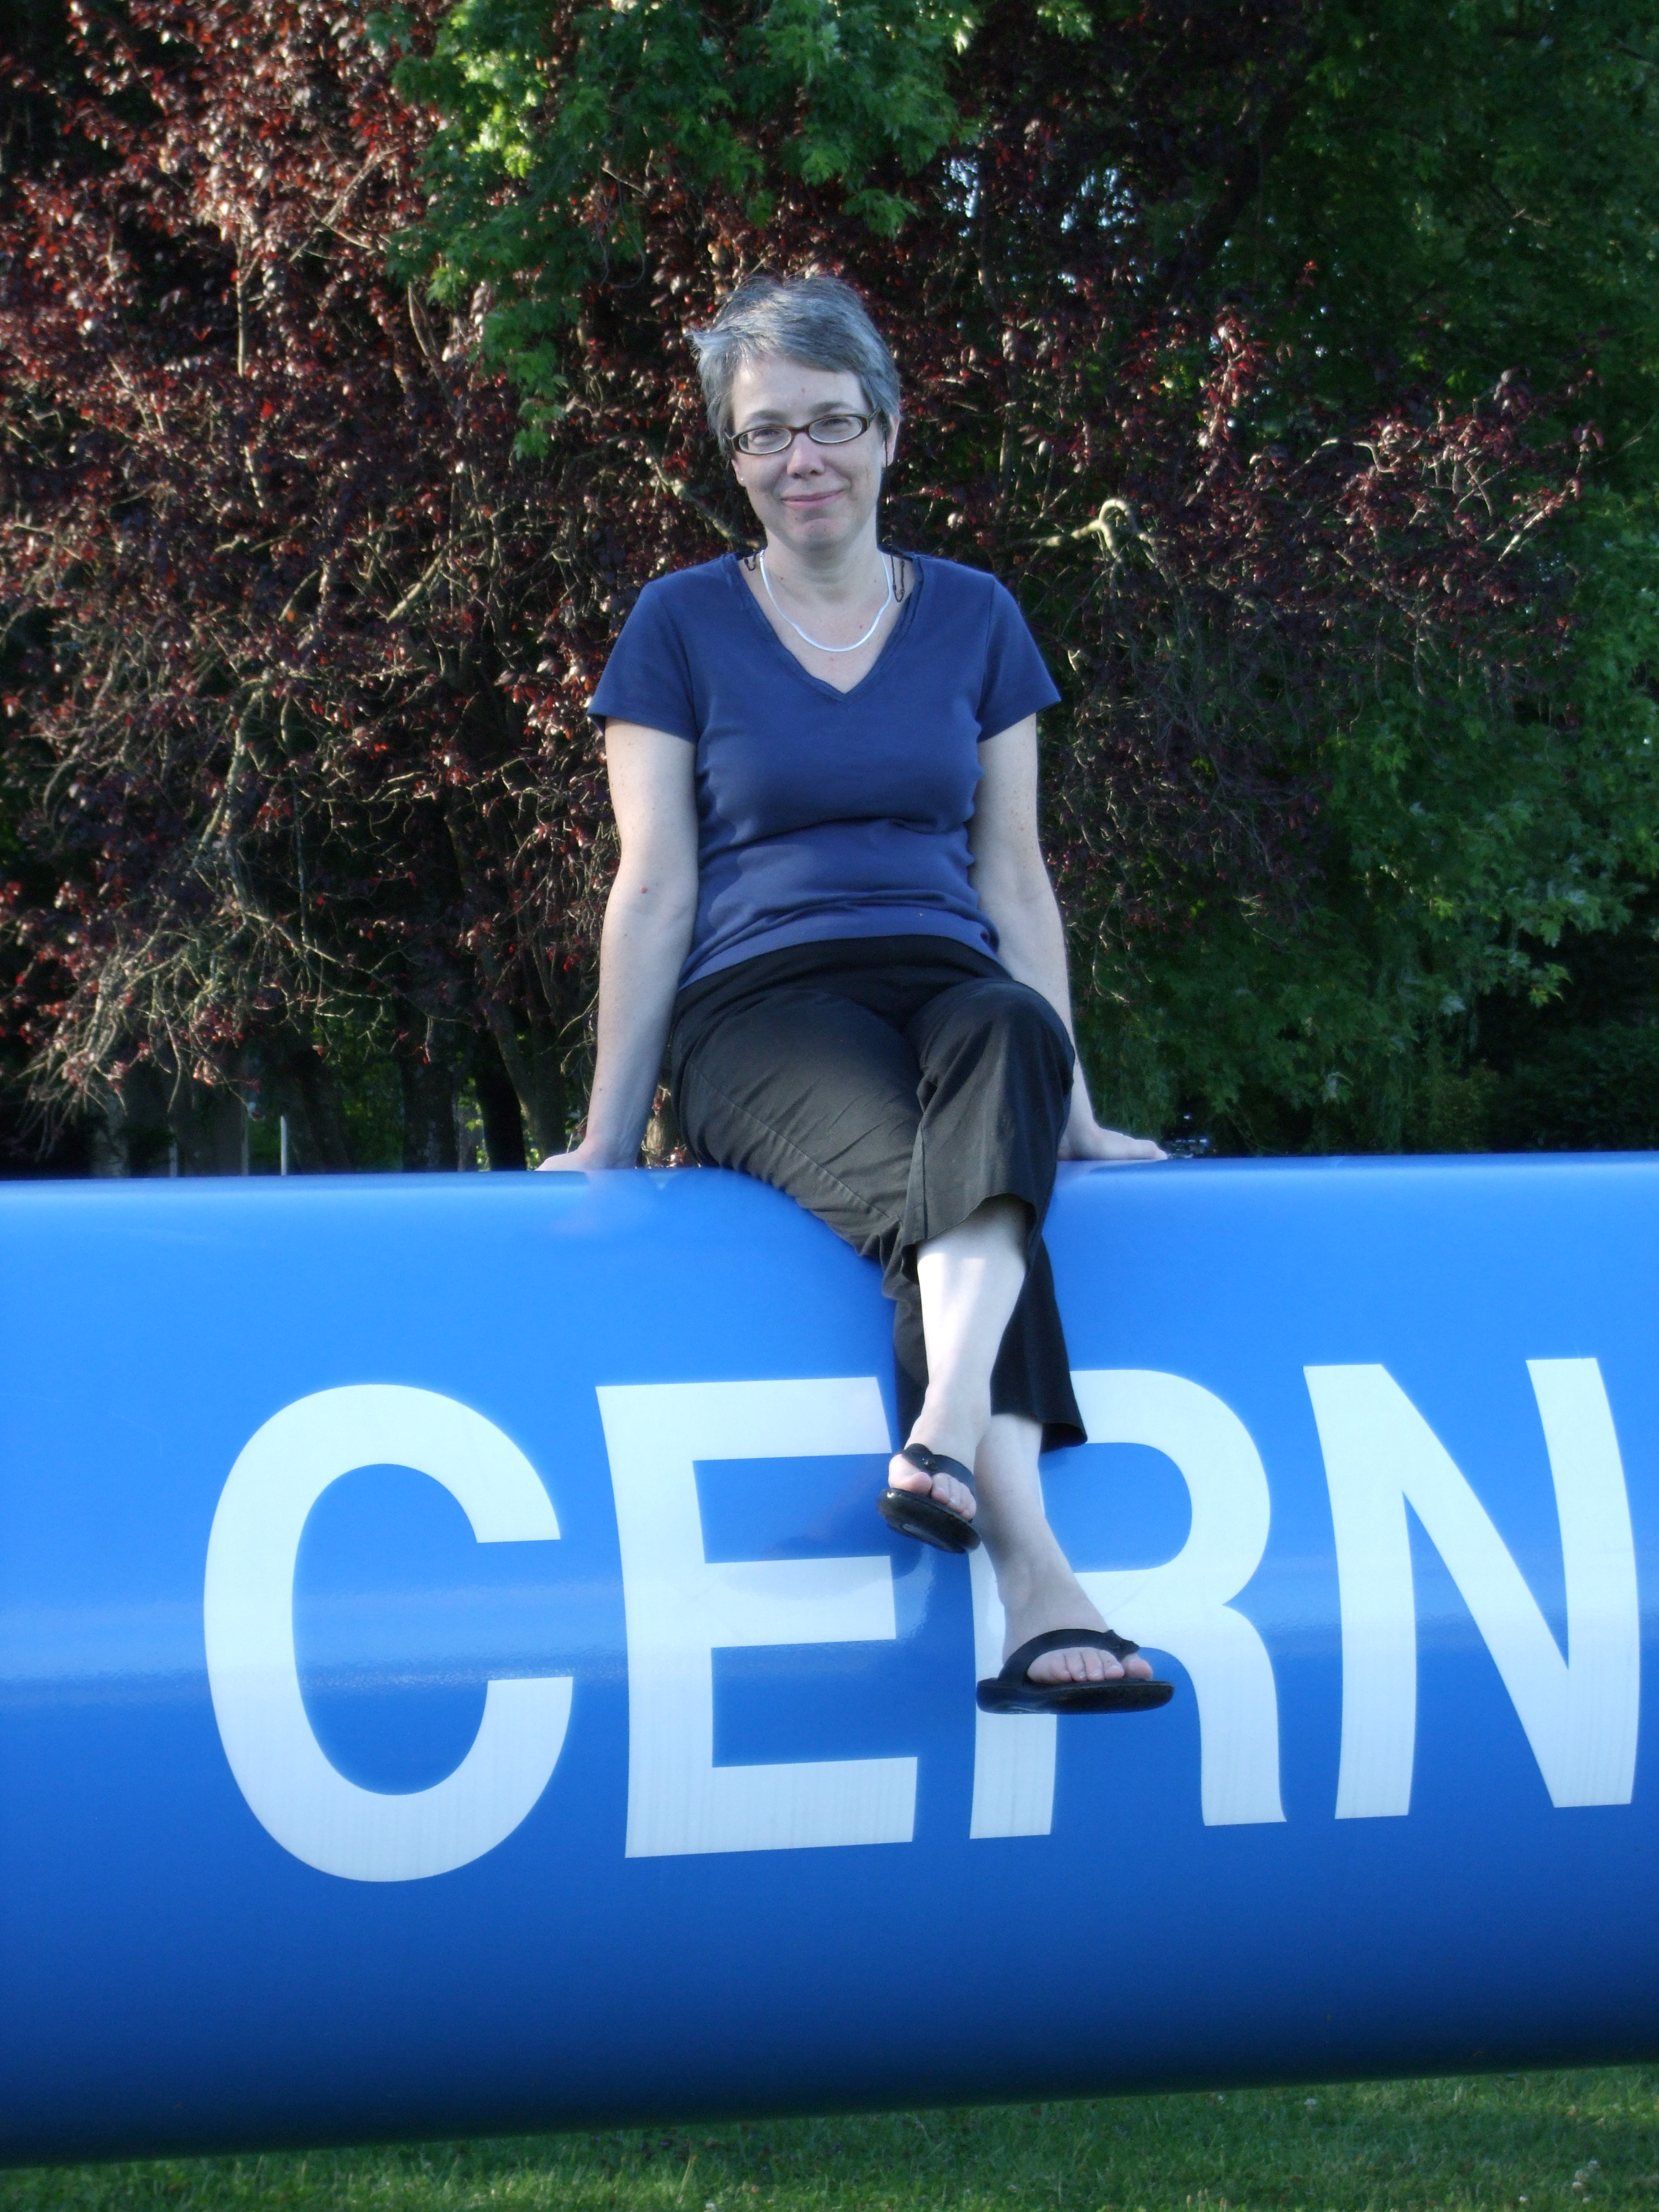 Sarah Eno, a physics professor at UMD, sits atop a model of a Large Hadron Collider (LHC) dipole magnet at CERN about 10 years ago. At the time, she was participating in LHC experiments and frequently spent her summers at the lab in Switzerland. Credit: Meenakshi Narain.